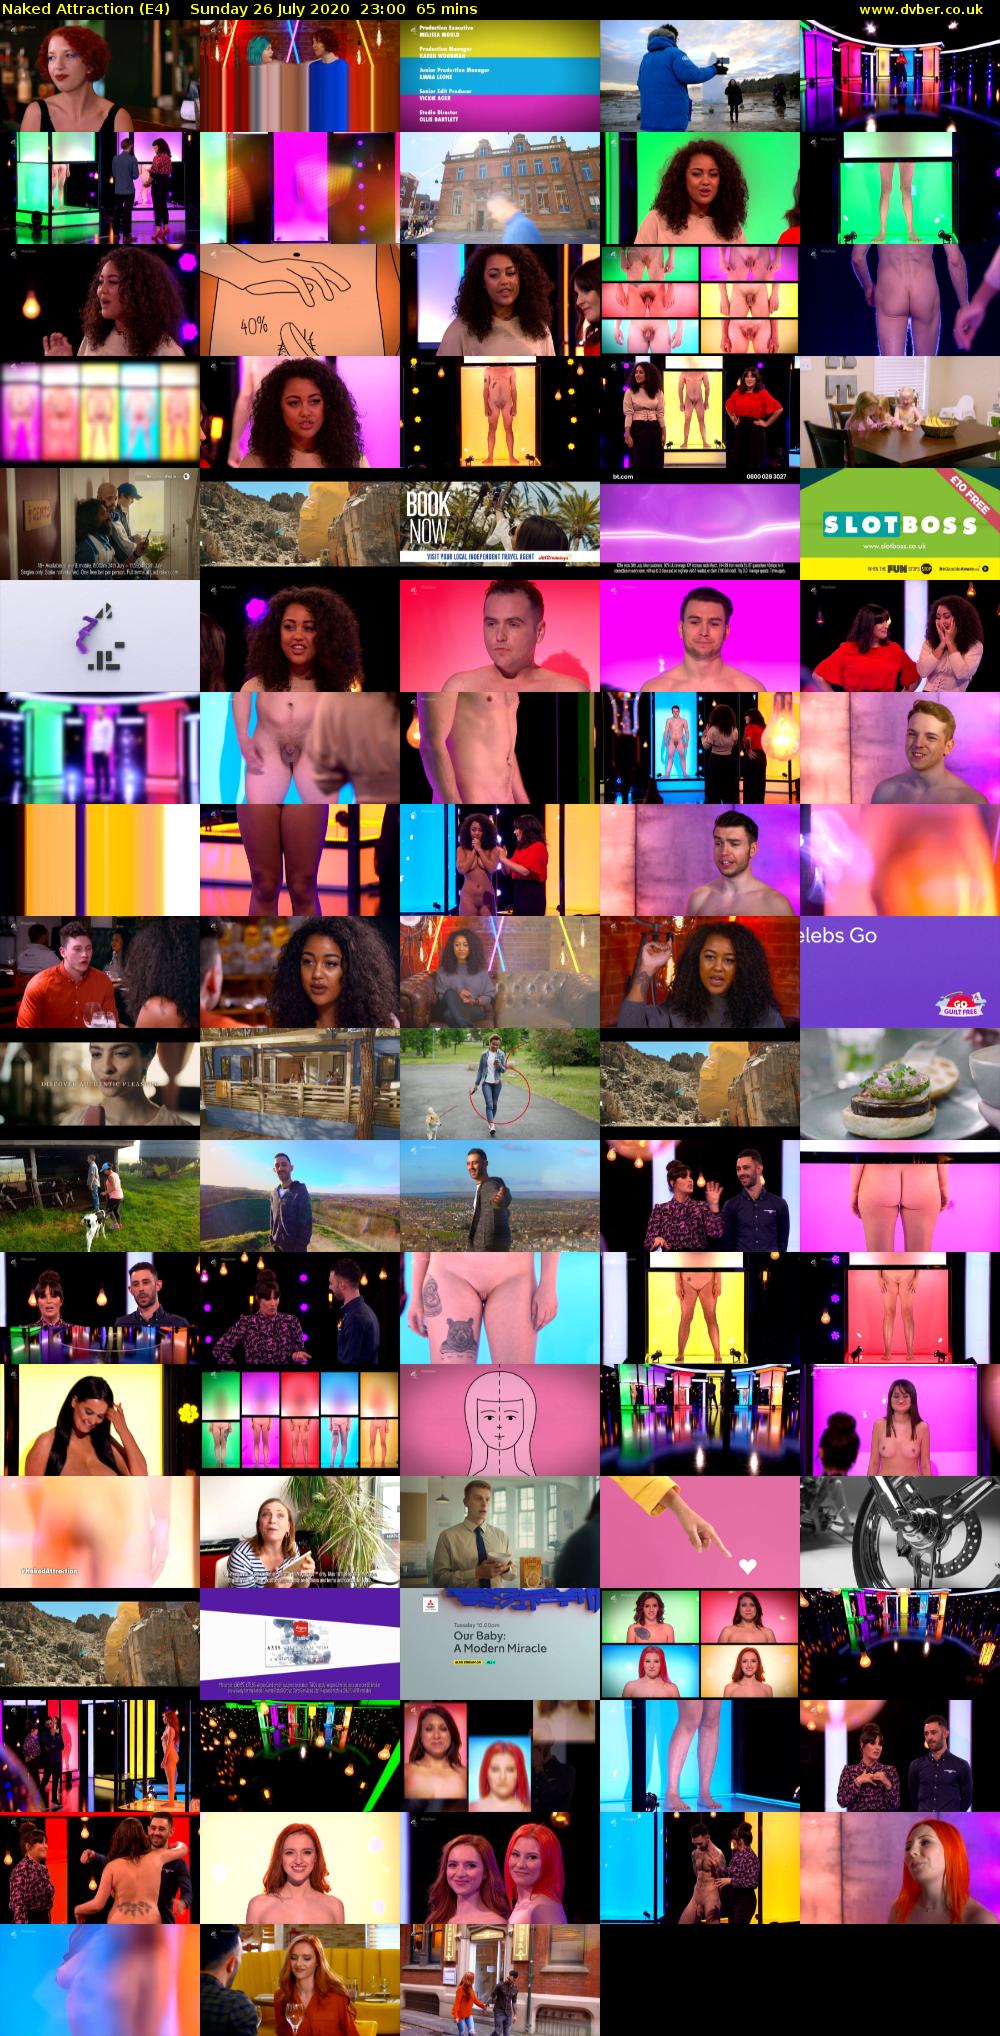 Naked Attraction (E4) Sunday 26 July 2020 23:00 - 00:05